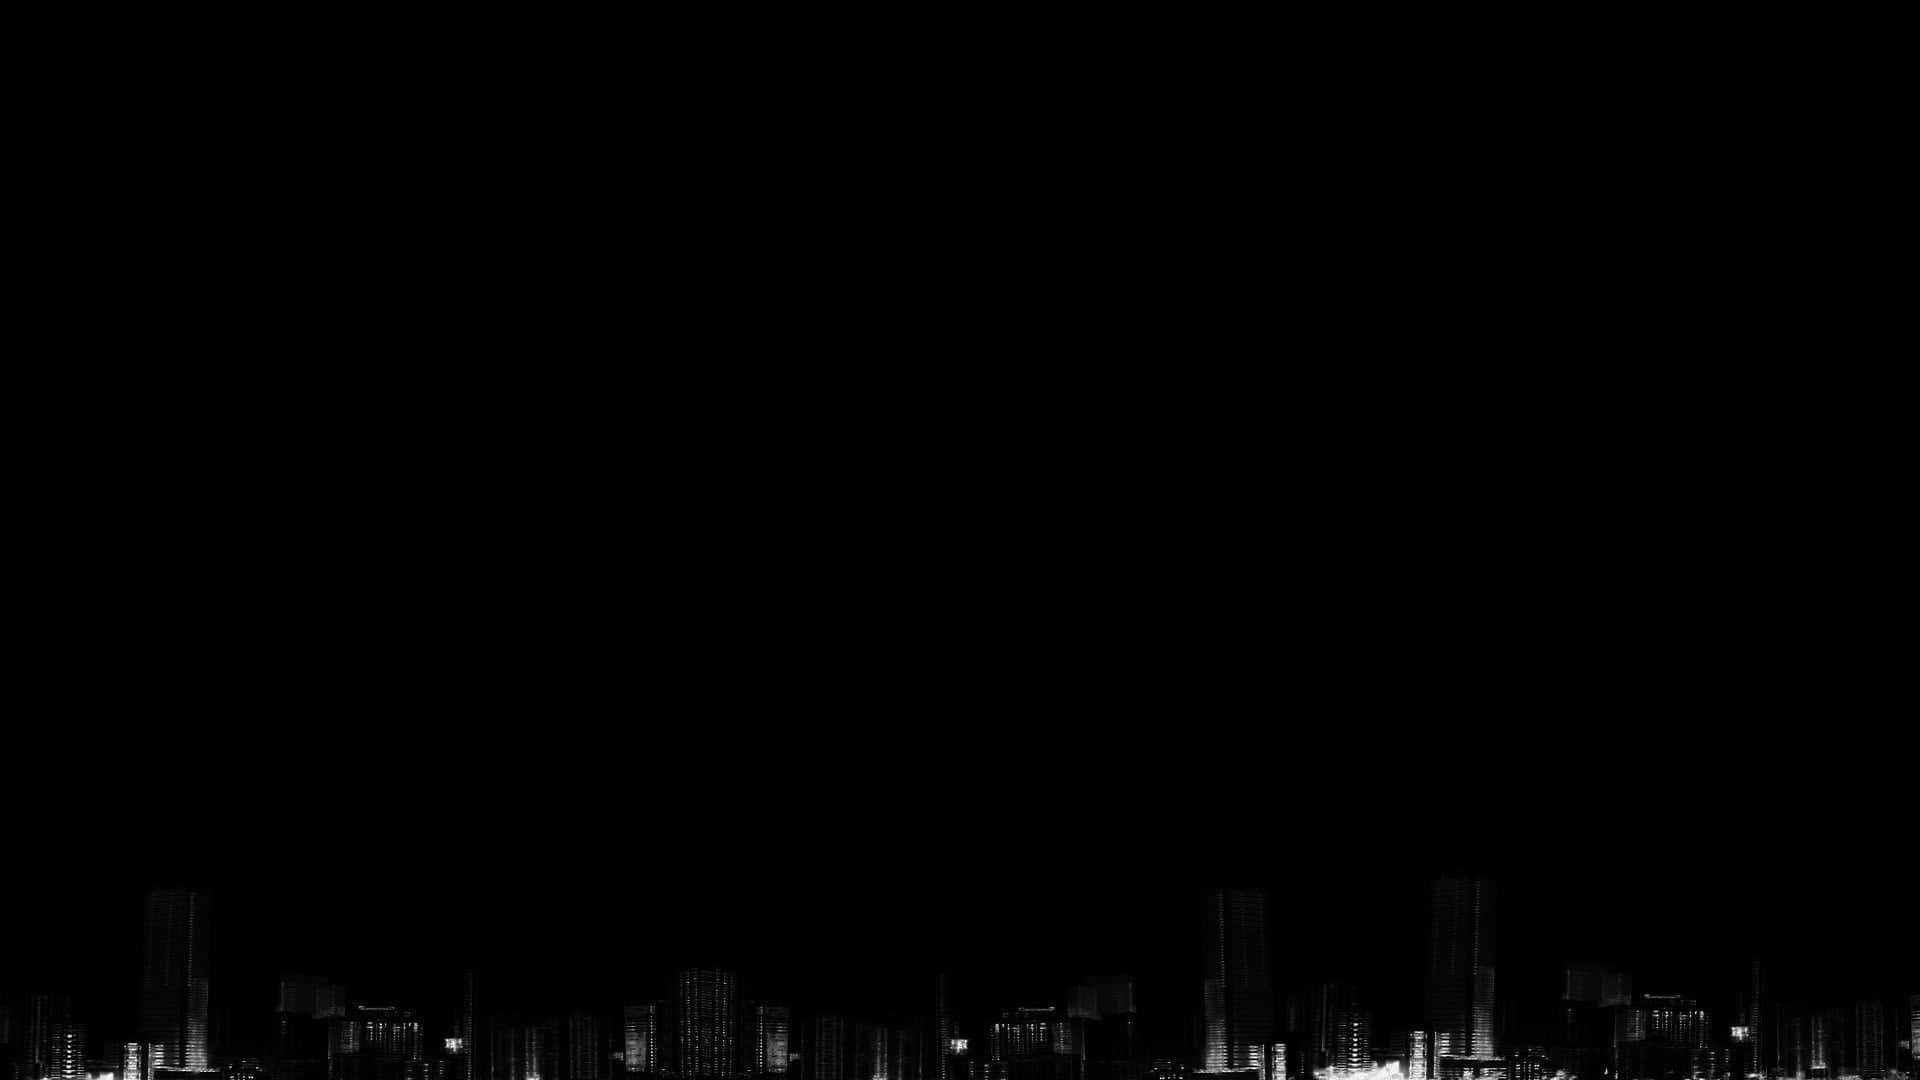 Black And White City Zoom Backgrounds | lupon.gov.ph